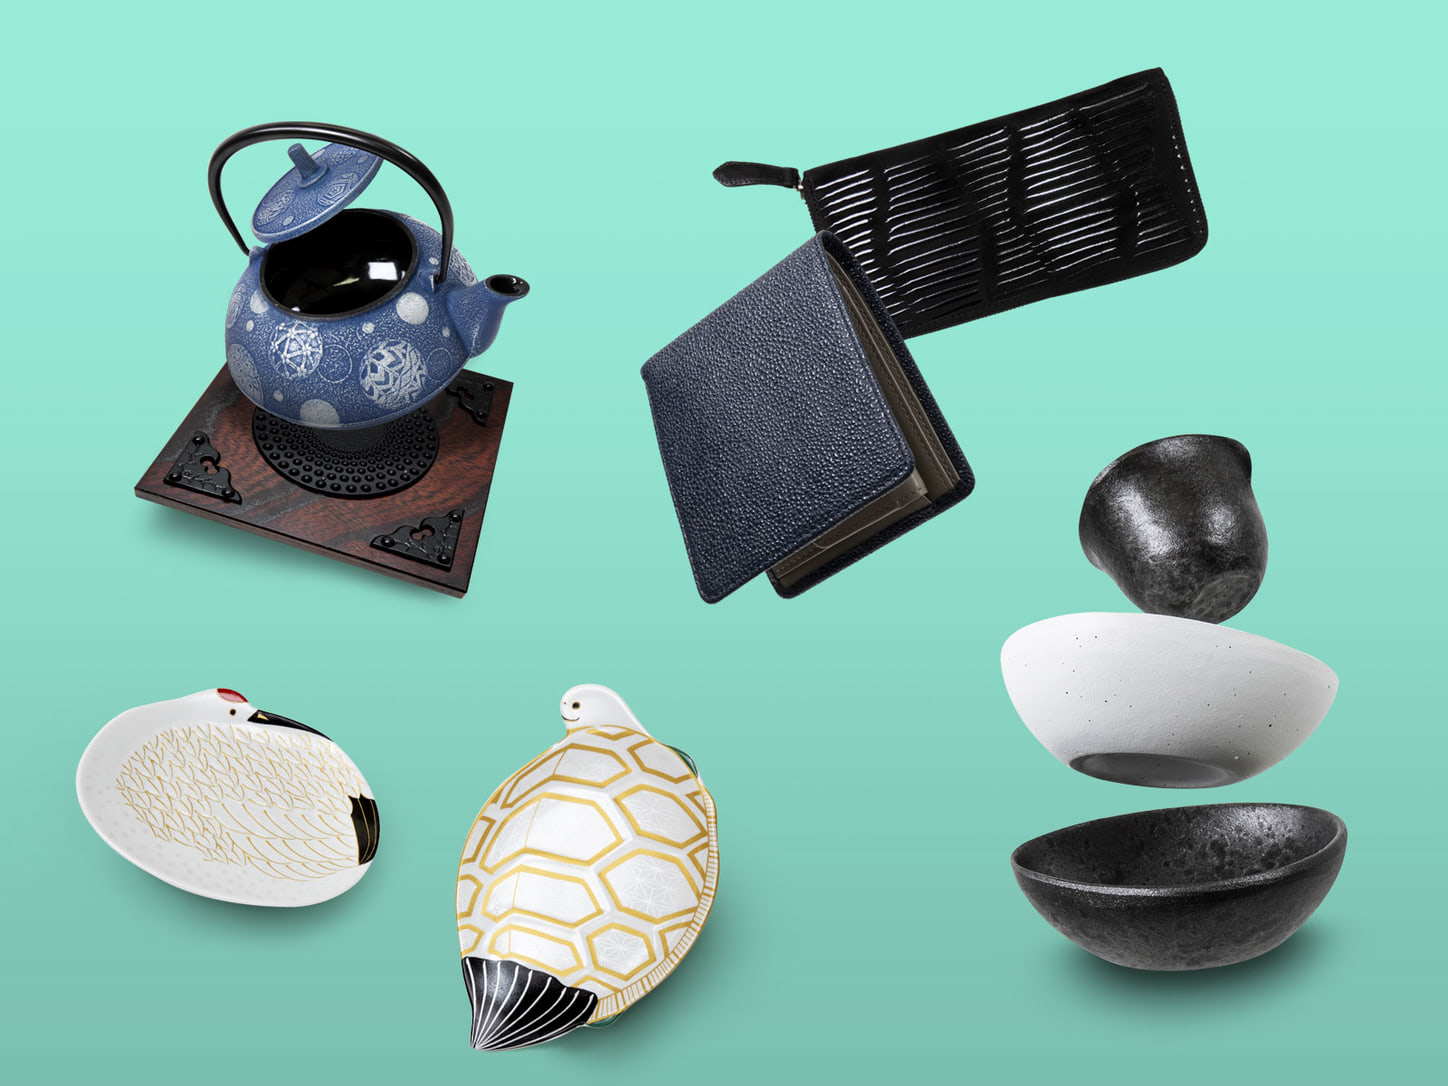 TW Christmas Gift Guide: 13 Ideas from Stationery Stocking Fillers to Japanese Artisanal Items